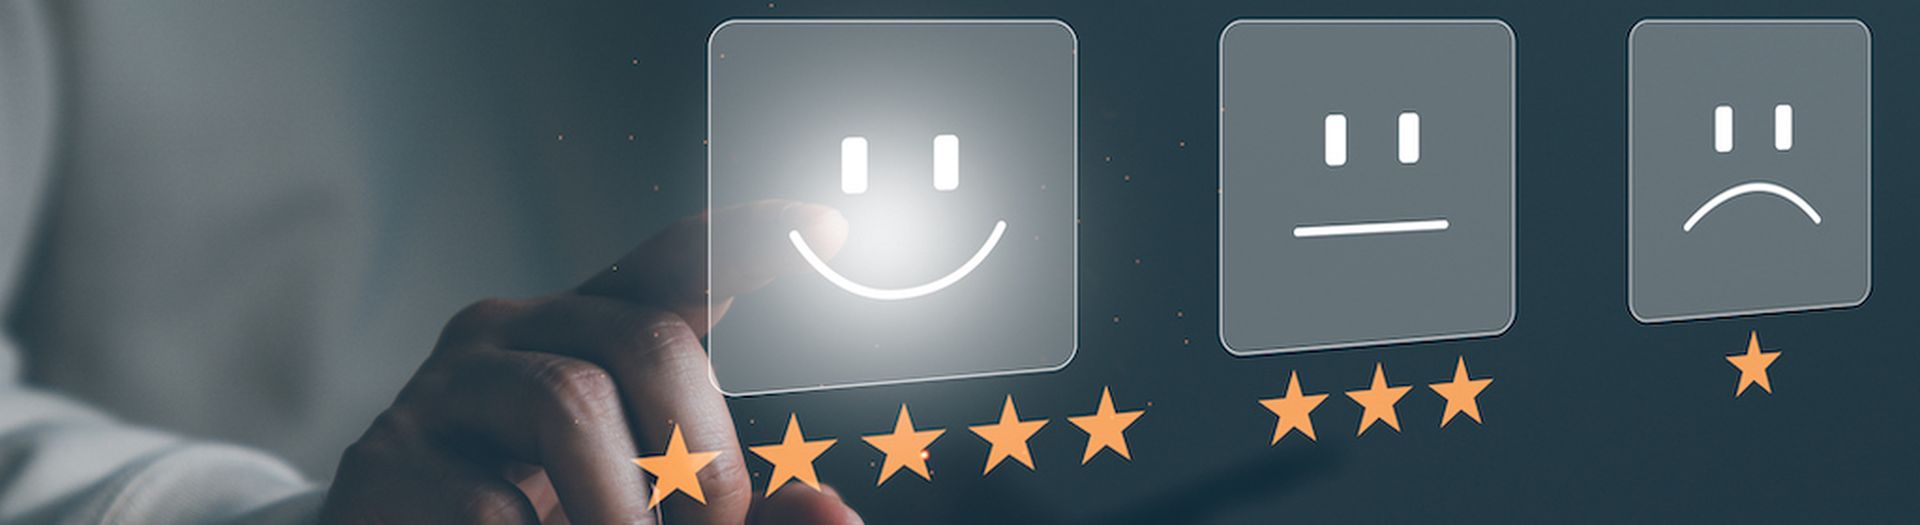 Customer service and Satisfaction concept ,Business people are touching the virtual screen on the happy Smiley face icon to give satisfaction in service. rating very impressed